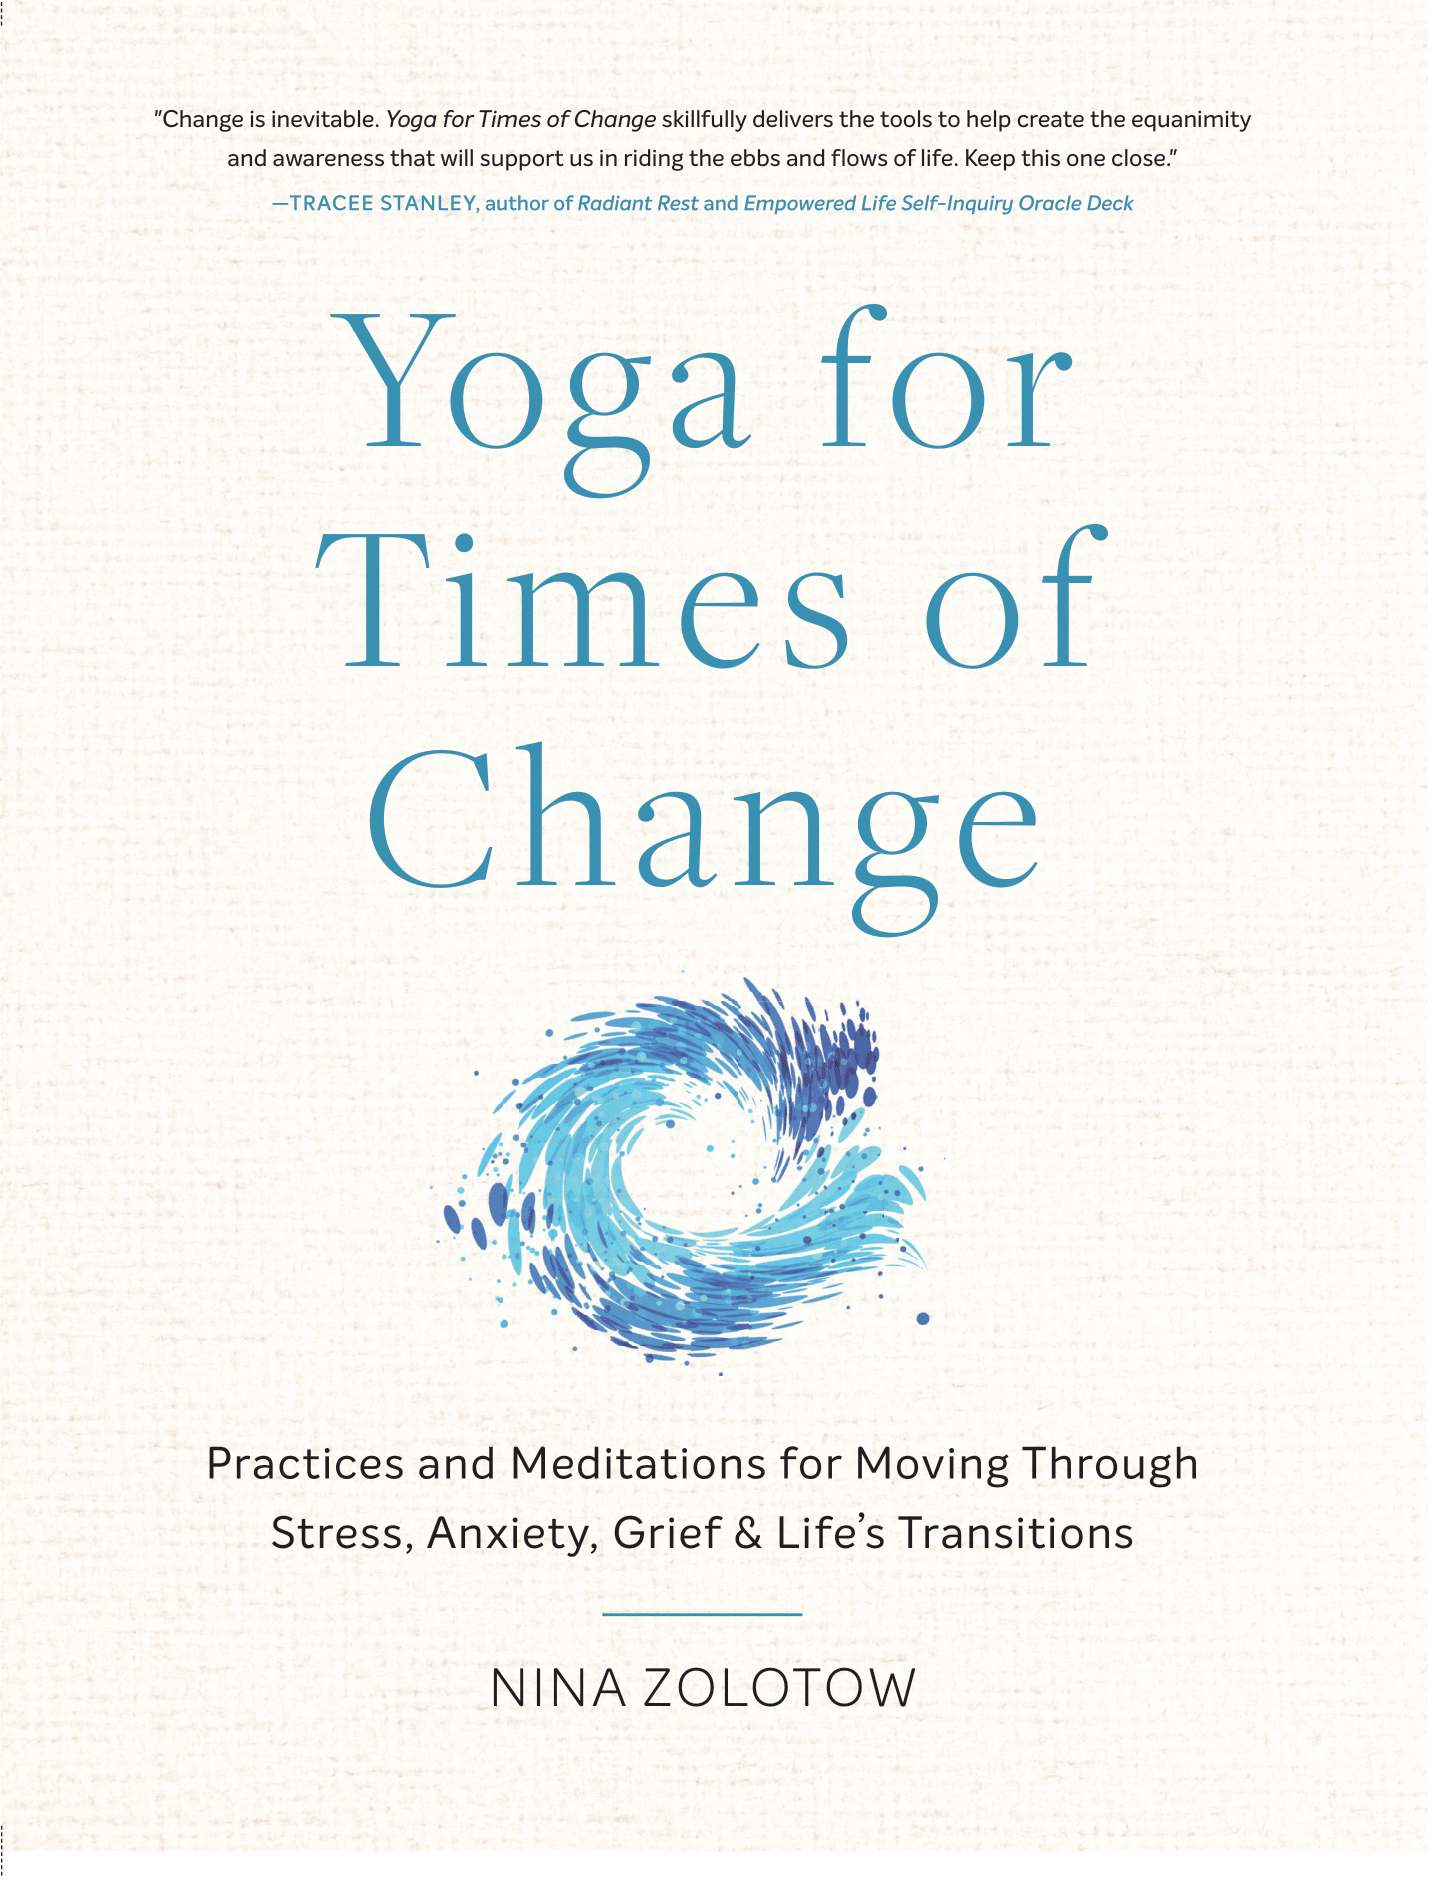 Book cover for newly released book- Yoga For Times of Change: Practices and Meditations for Moving Through Stress, Anxiety, Grief &amp; Life’s Transitions by Nina Zolotow.